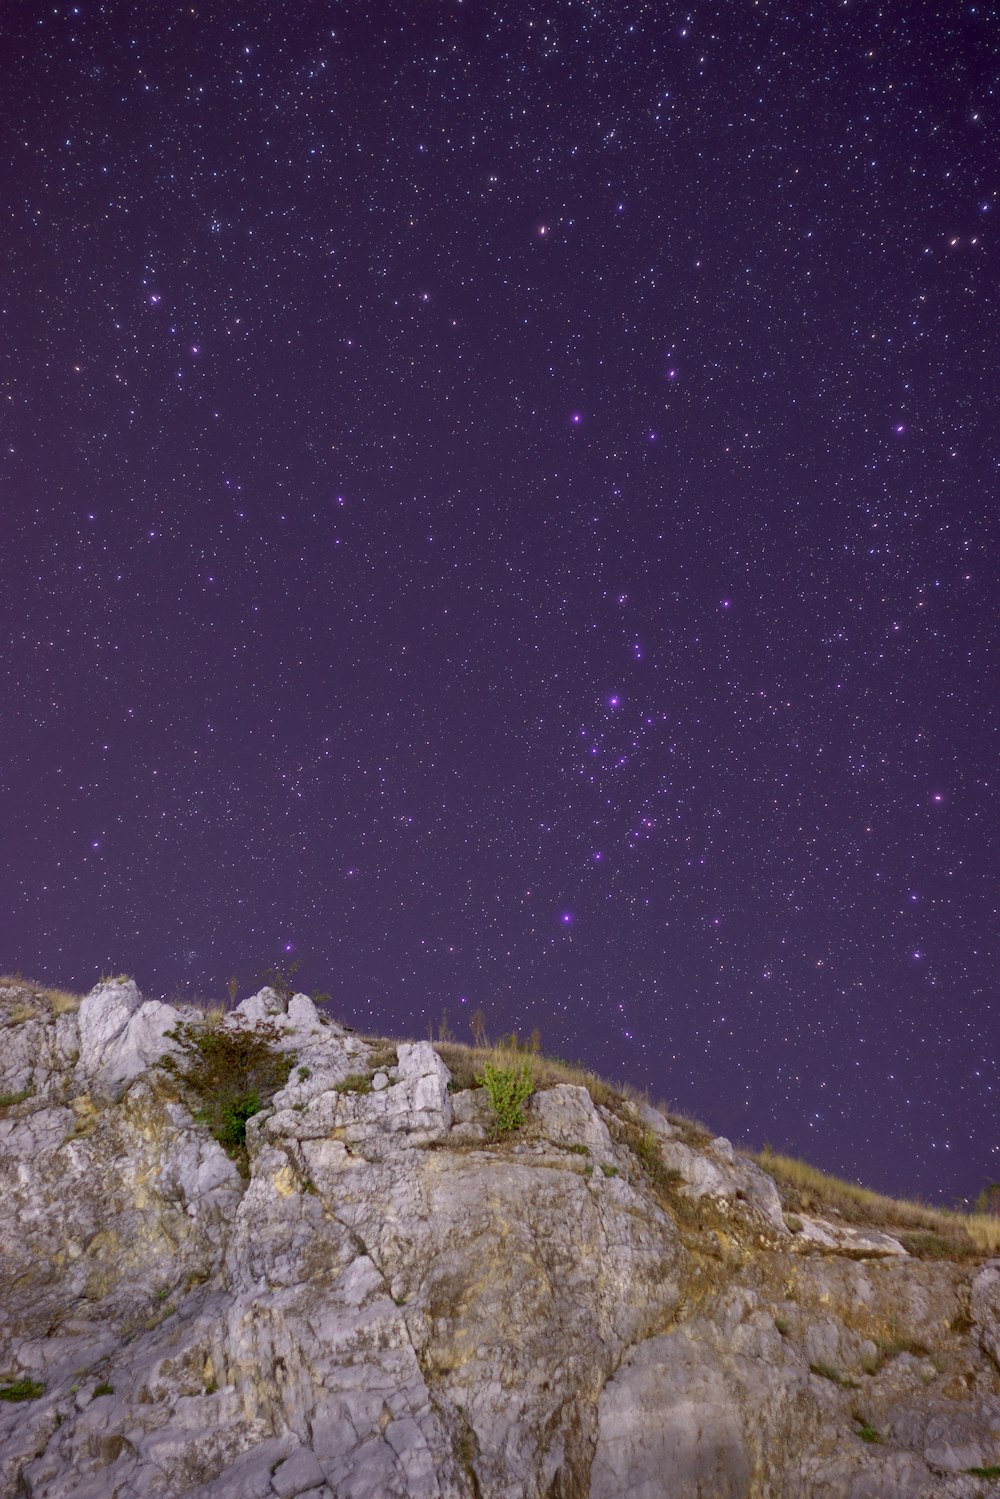 the night sky is filled with stars above a rocky hill